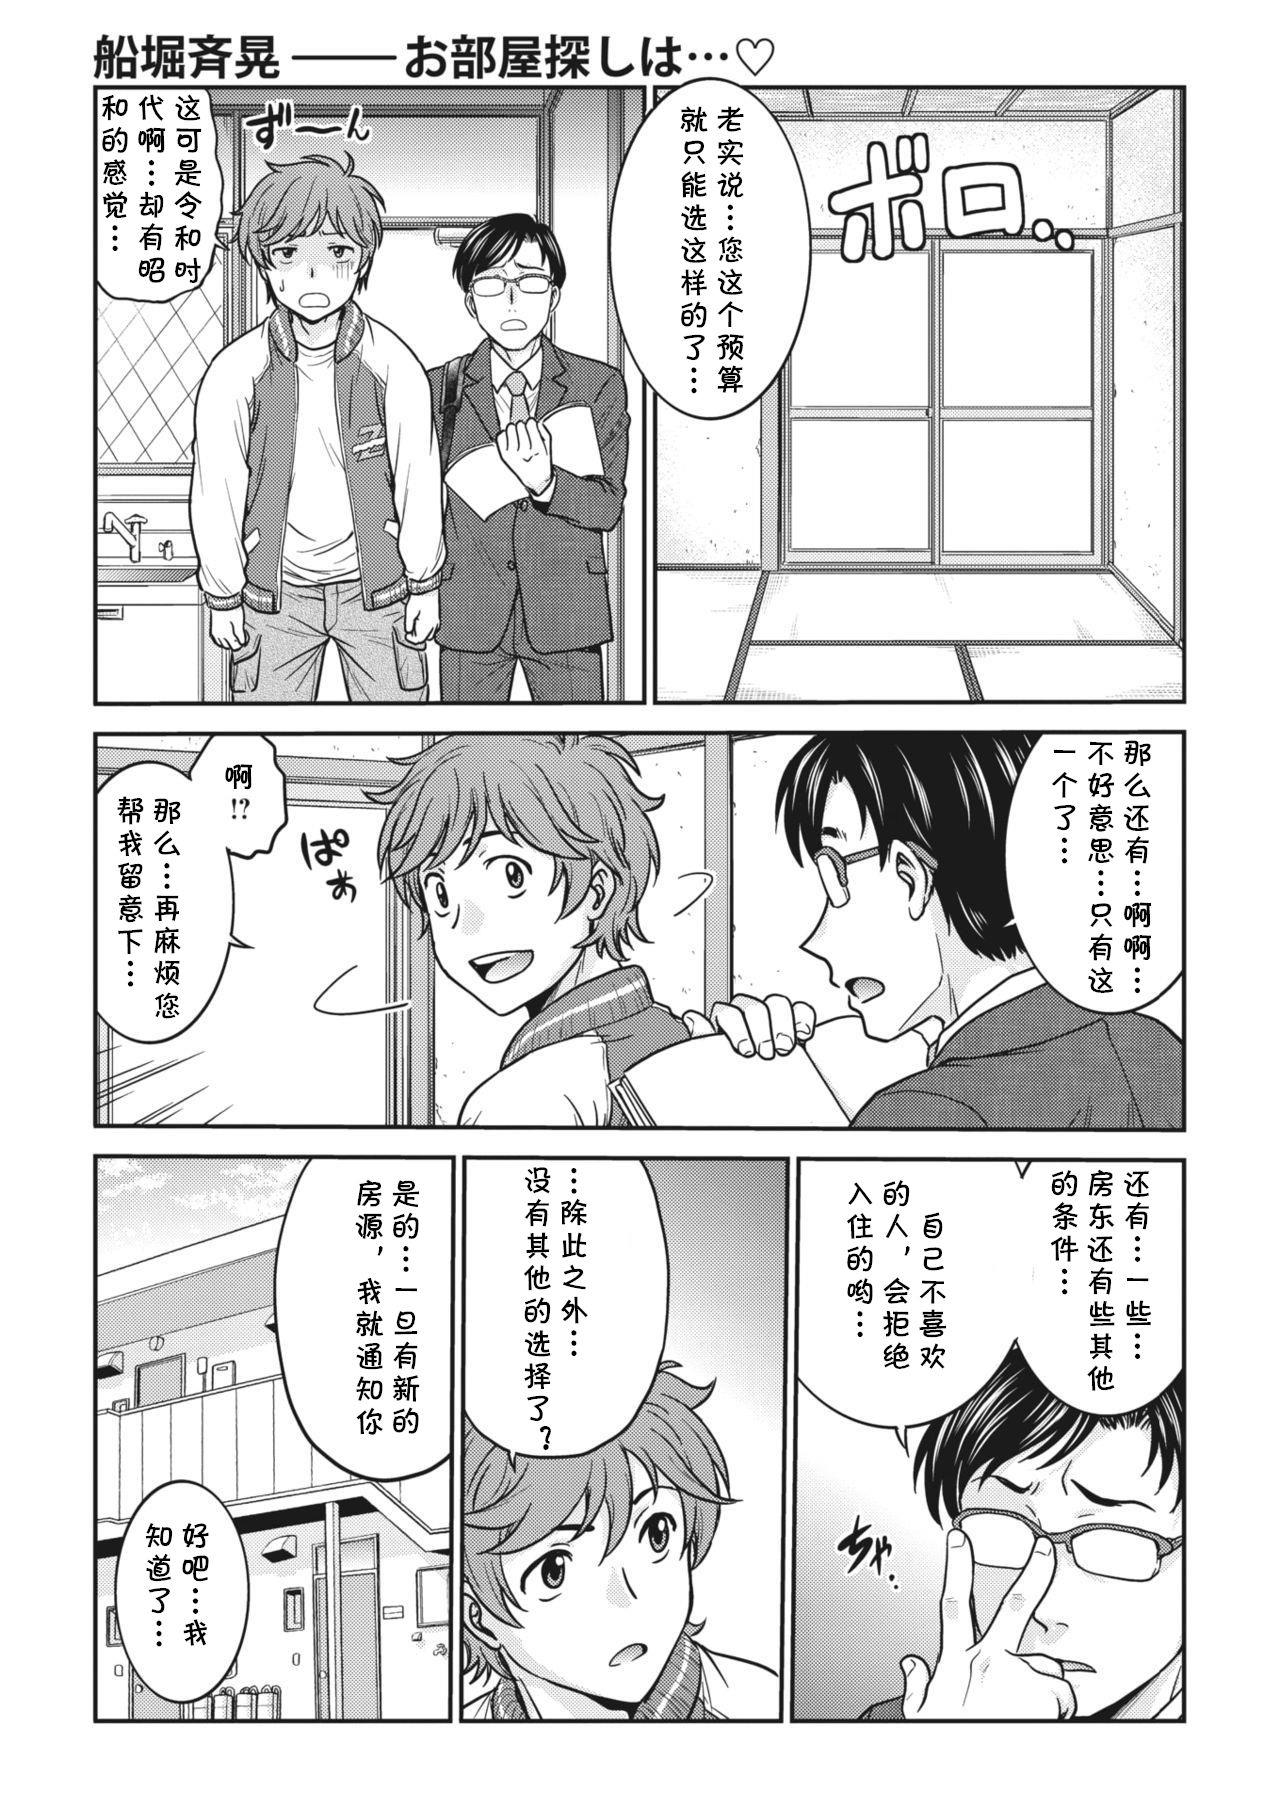 Oldyoung 部屋を探しは… Con - Page 1